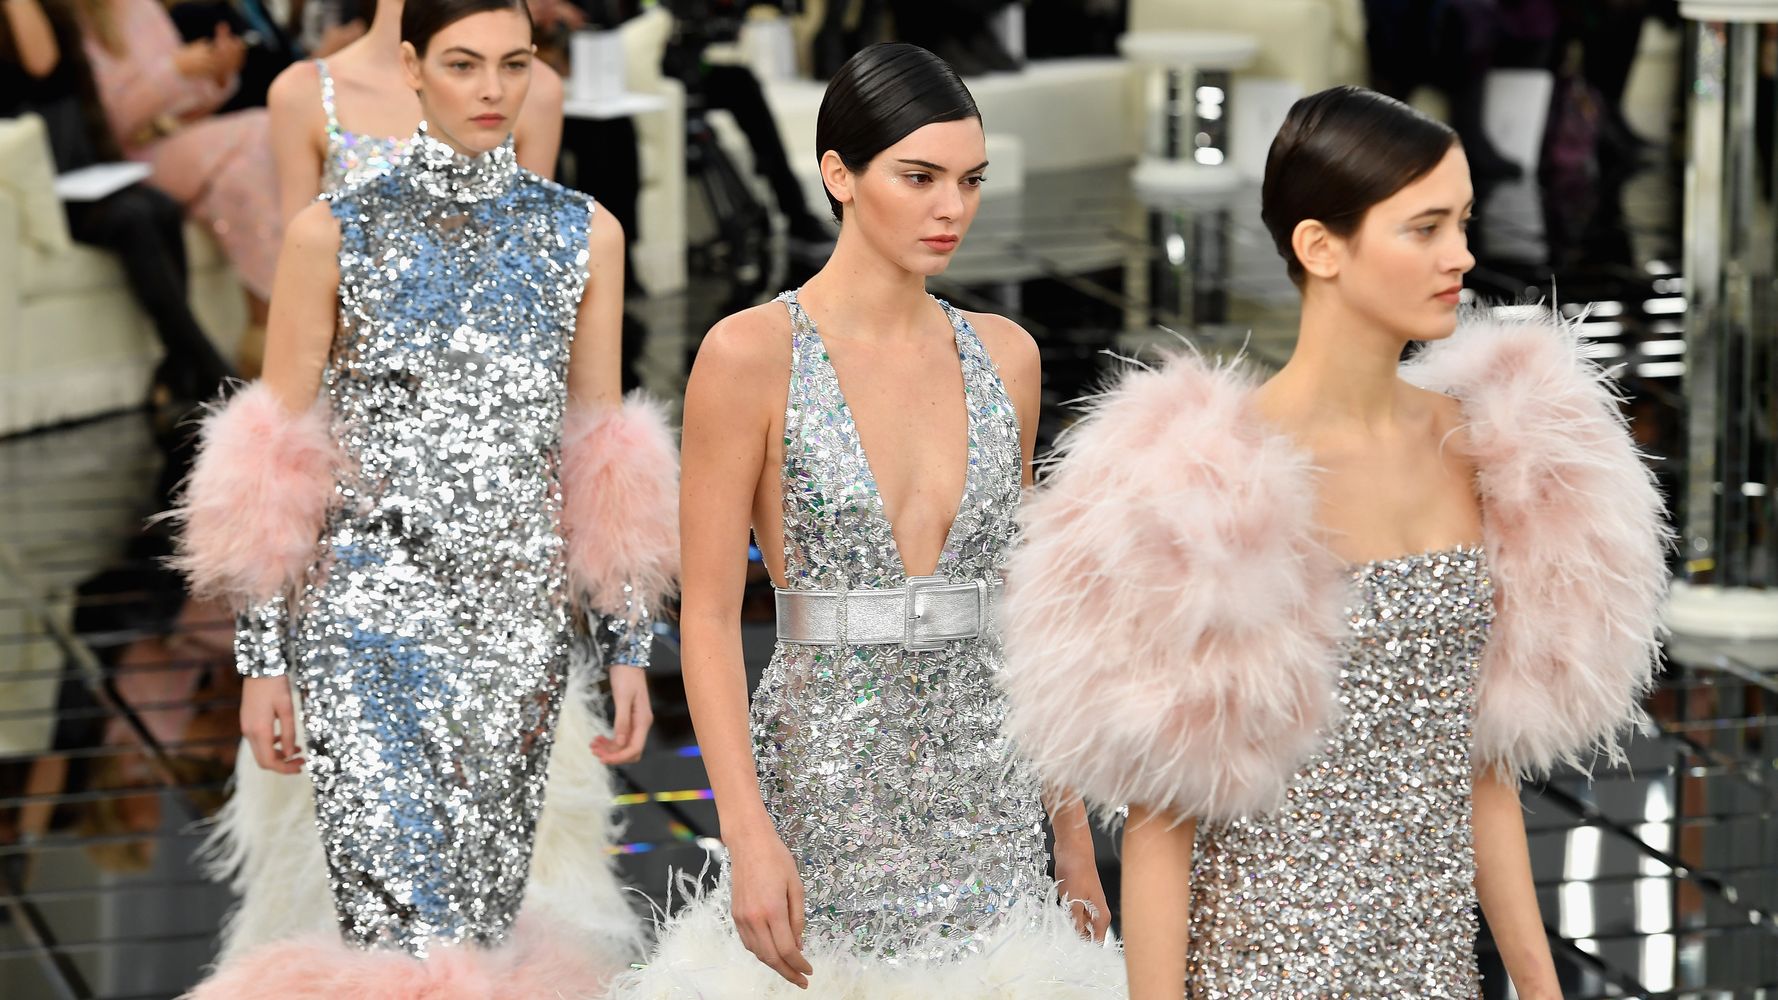 Chanel Just Unveiled The Dreamiest Dresses You'll See This Year